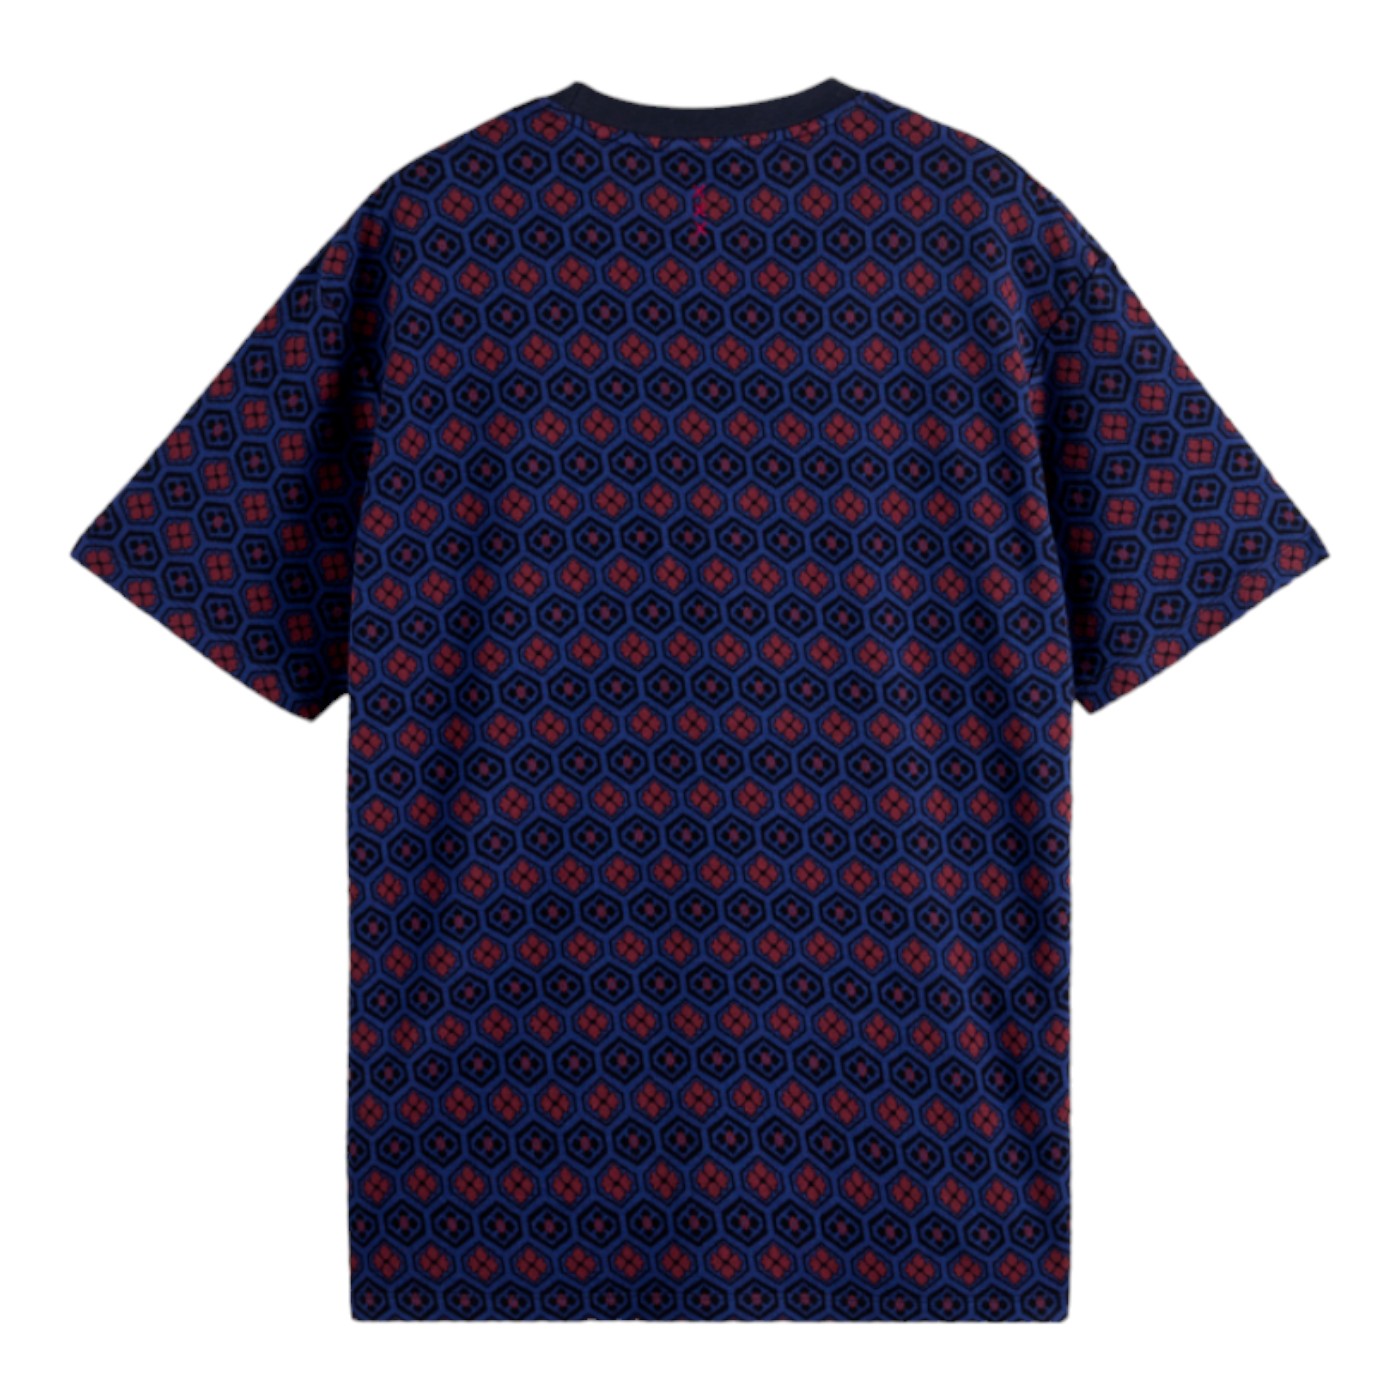 Dark blue and red patterned tee shirt